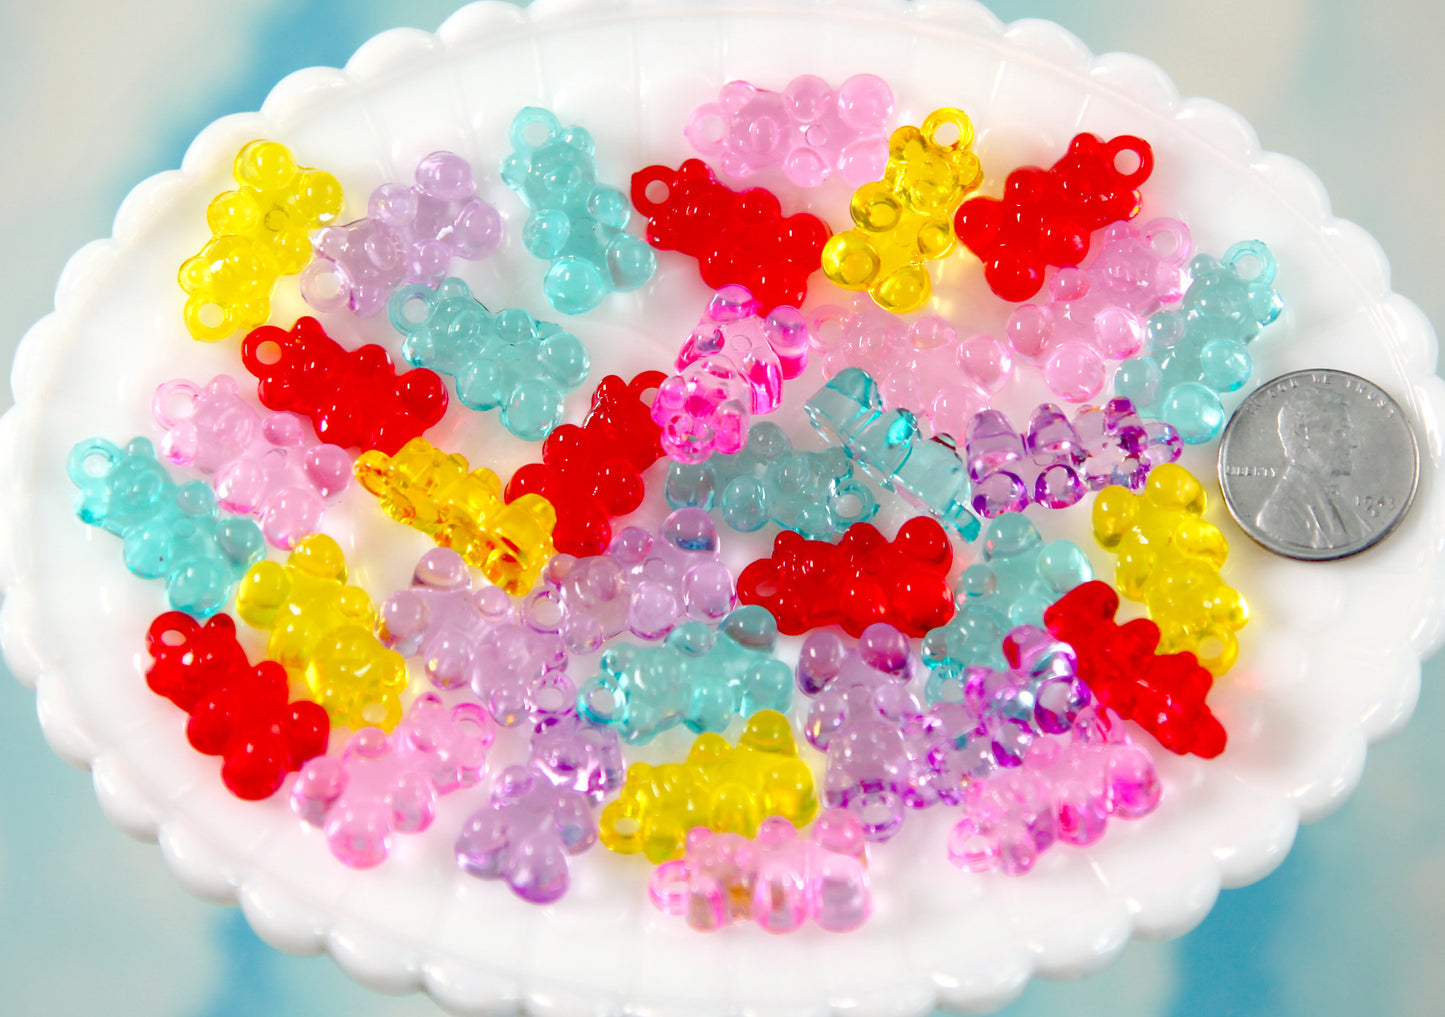 Fake Gummy Bear Charms - 20mm Fake Gummy Bears with Charm Loop - Fake Candy Resin or Plastic Charms - 40 pc set